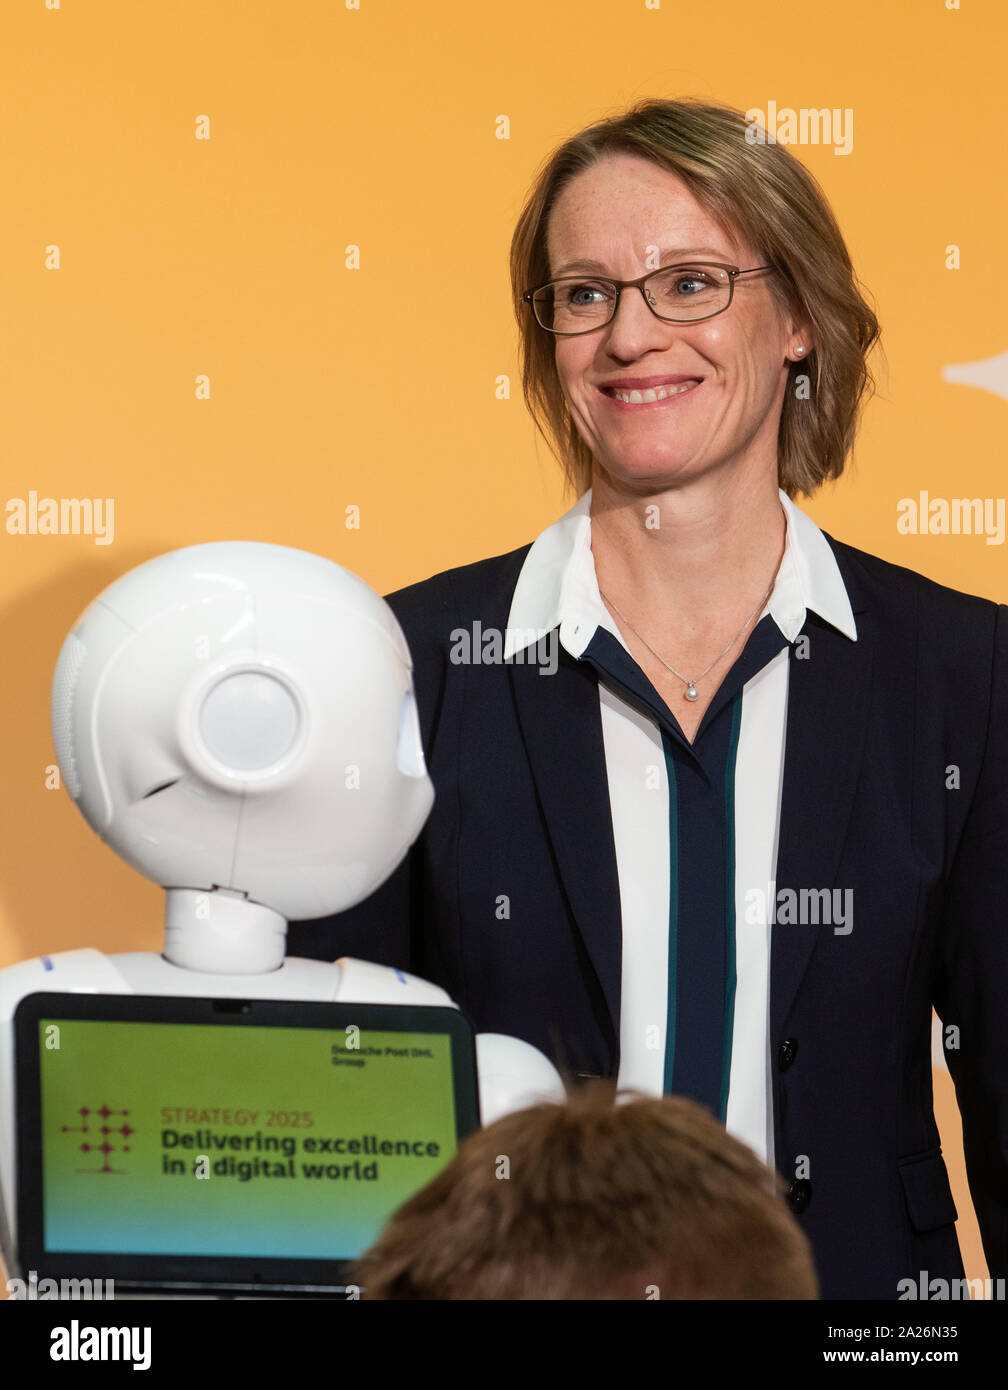 01 October 2019, Hessen, Frankfurt/Main: Melanie Kreis, CFO of Deutsche Post AG, smiles next to a robot before the start of a press conference before presenting Deutsche Post's strategy until 2025. Every five years, the Bonn-based Group updates its approach. Photo: Frank Rumpenhorst/dpa Stock Photo